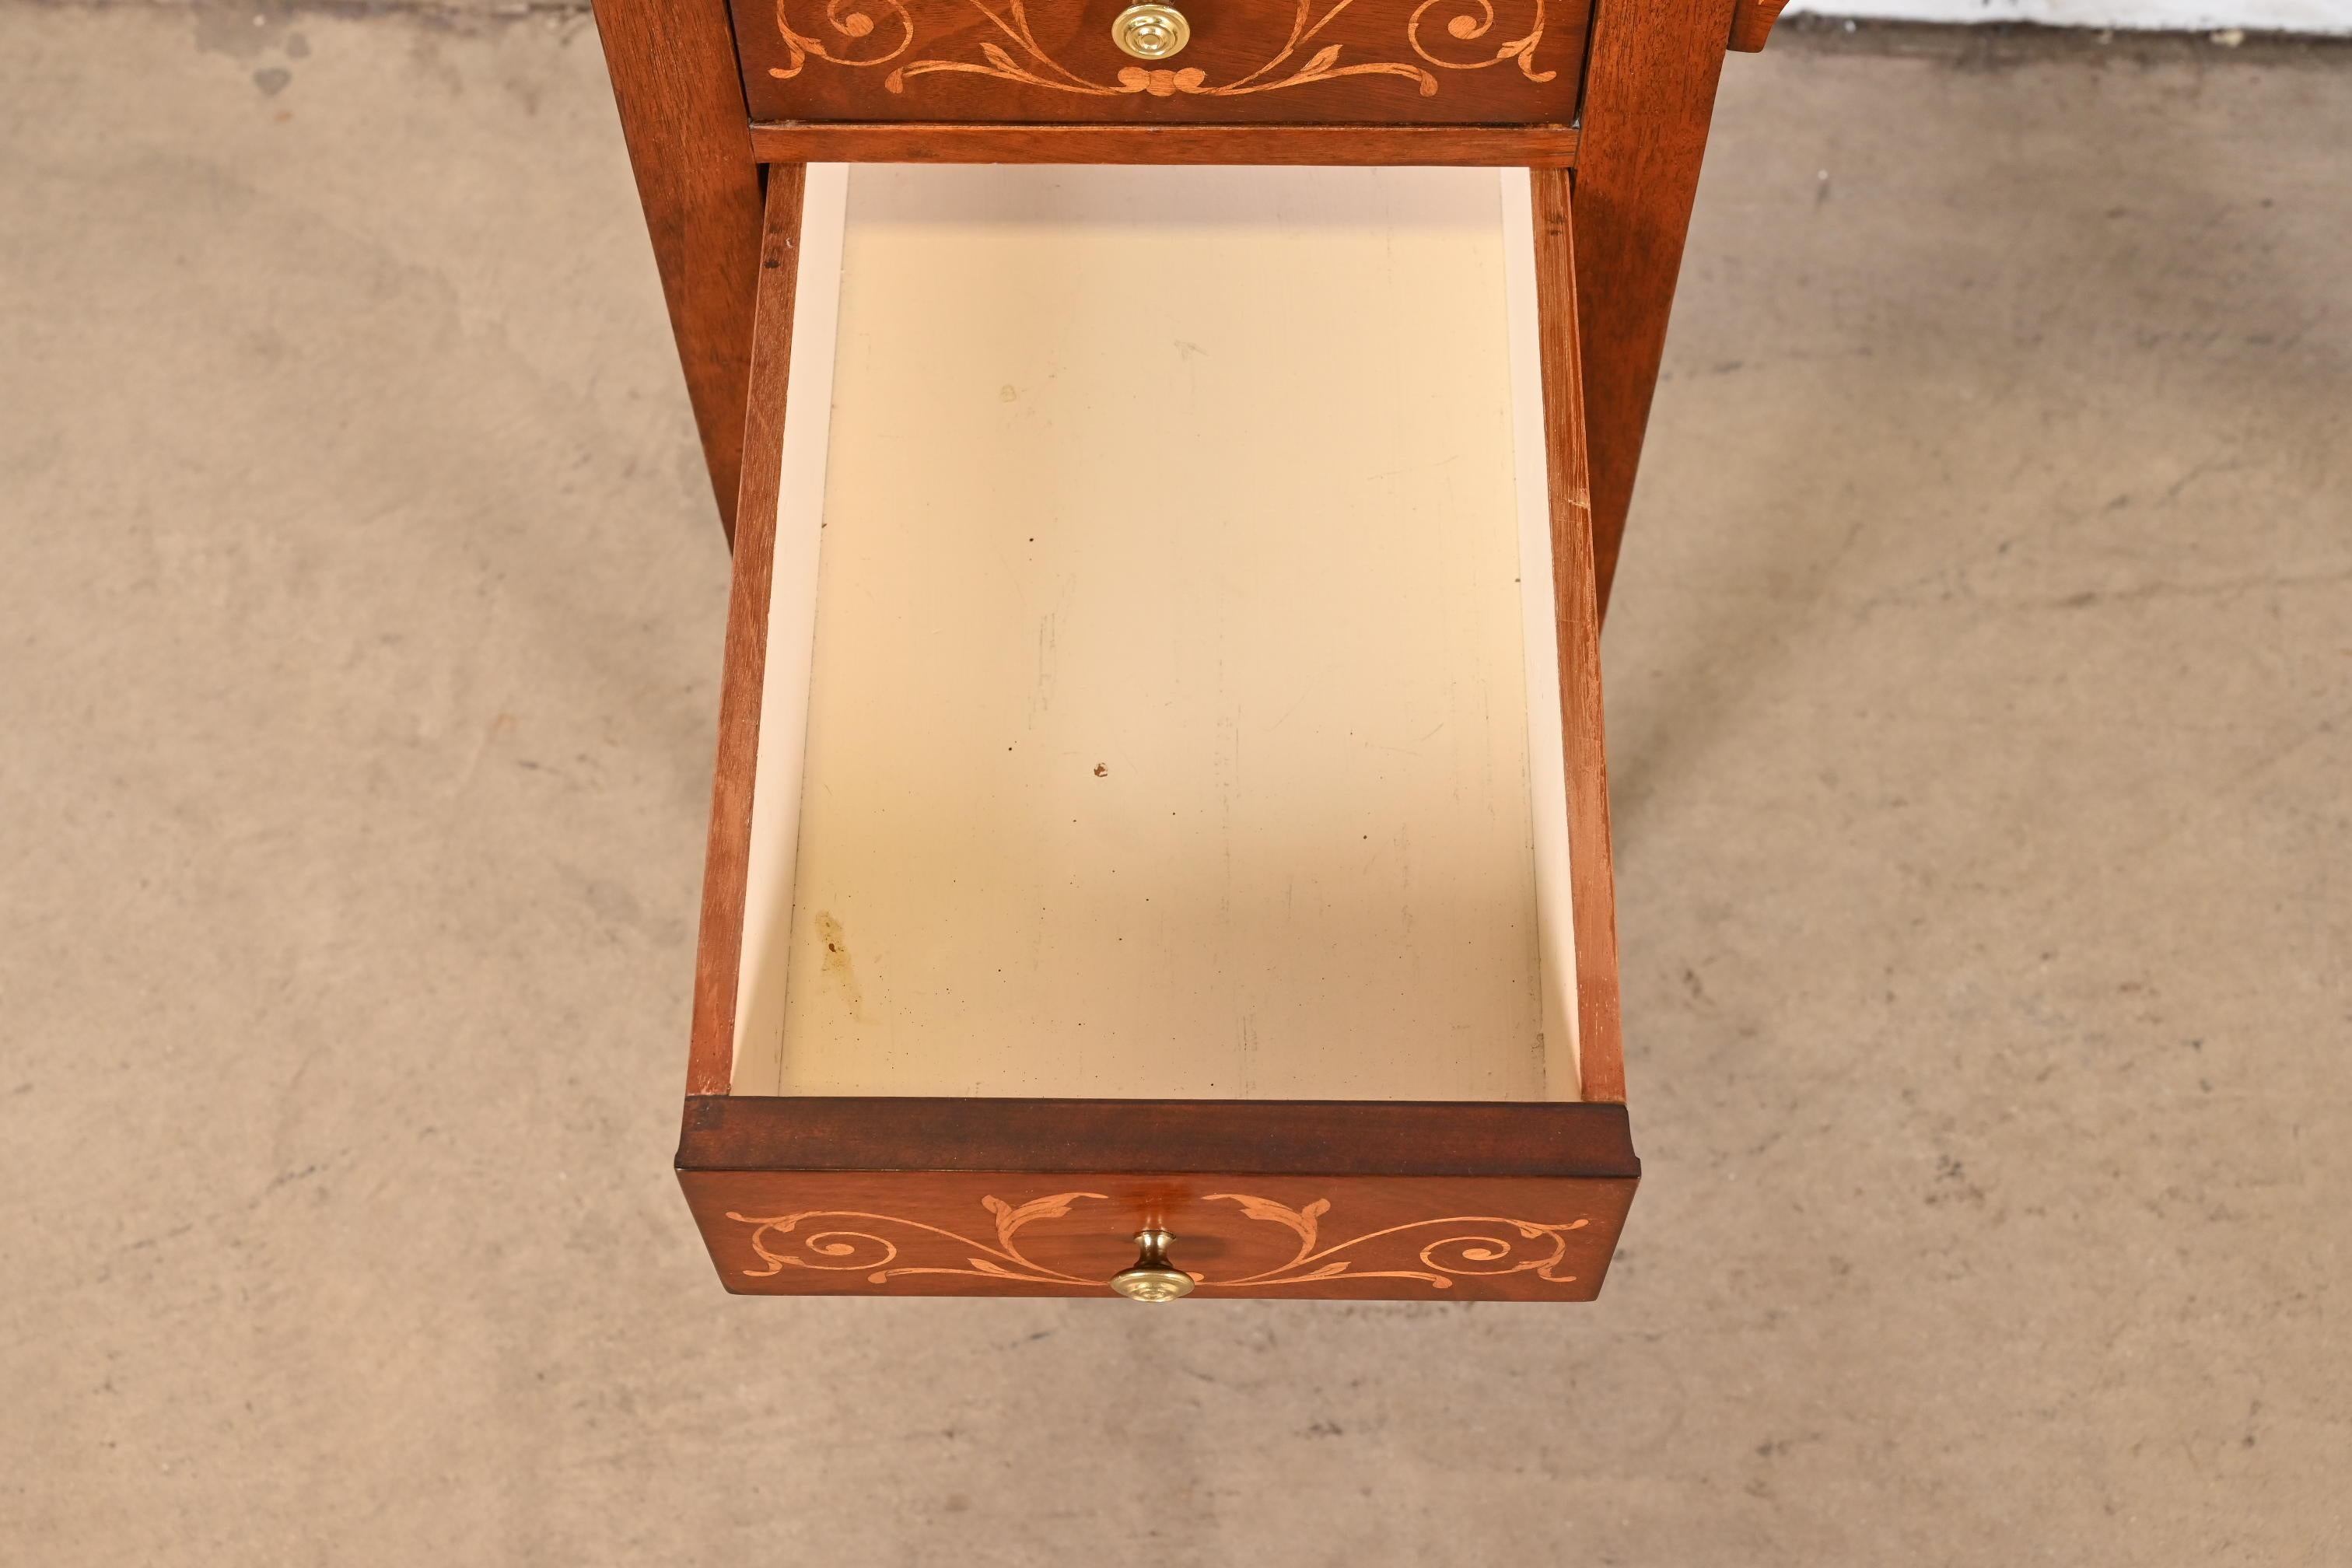 French Regency Louis XVI Mahogany Inlaid Marquetry Vanity by Johnson Furniture For Sale 4